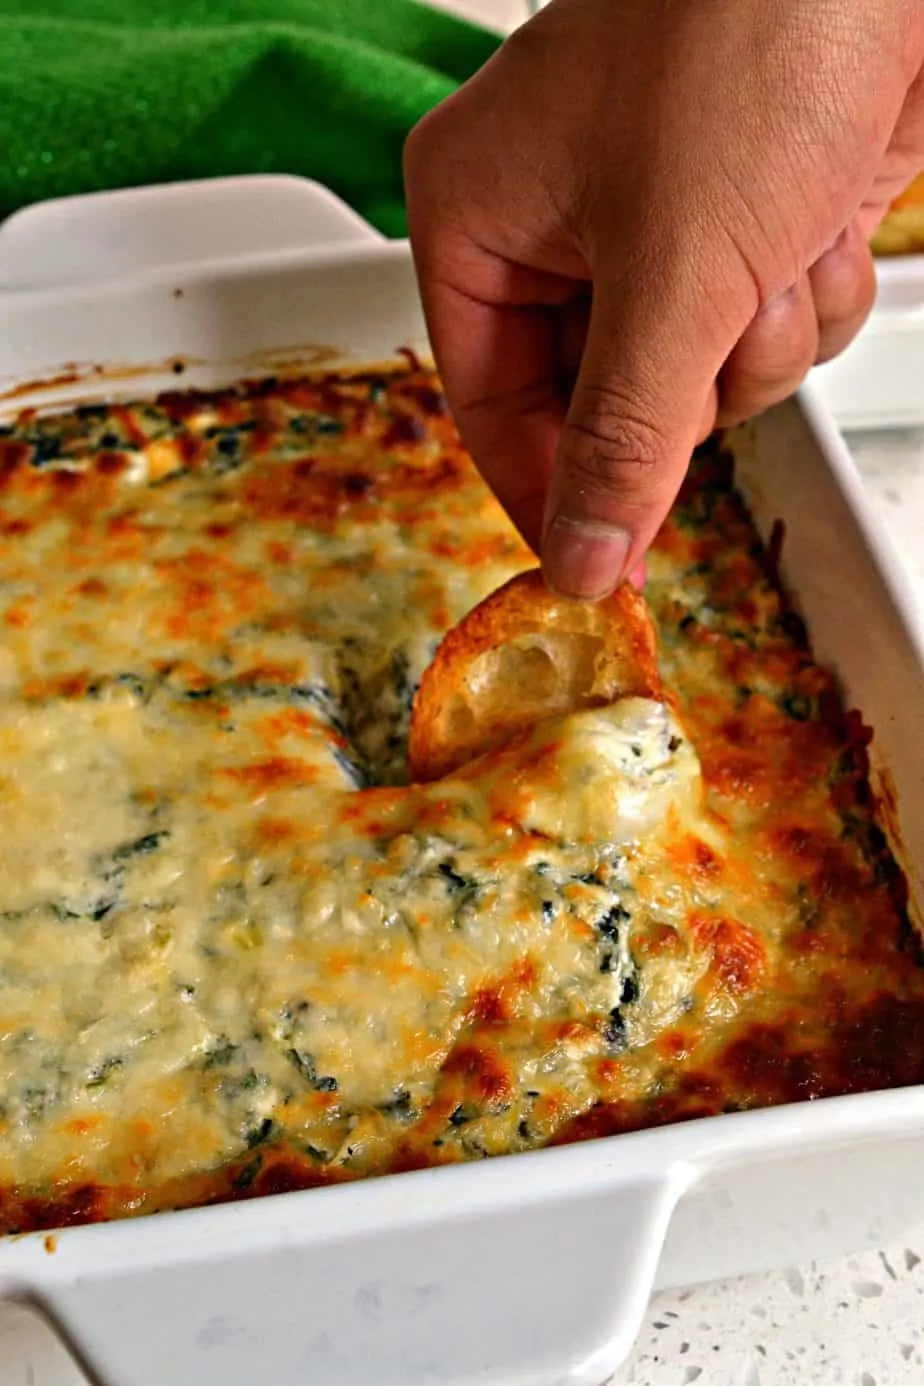 A super easy delectable cheesy spinach and artichoke party dip prepped in less than ten minutes.